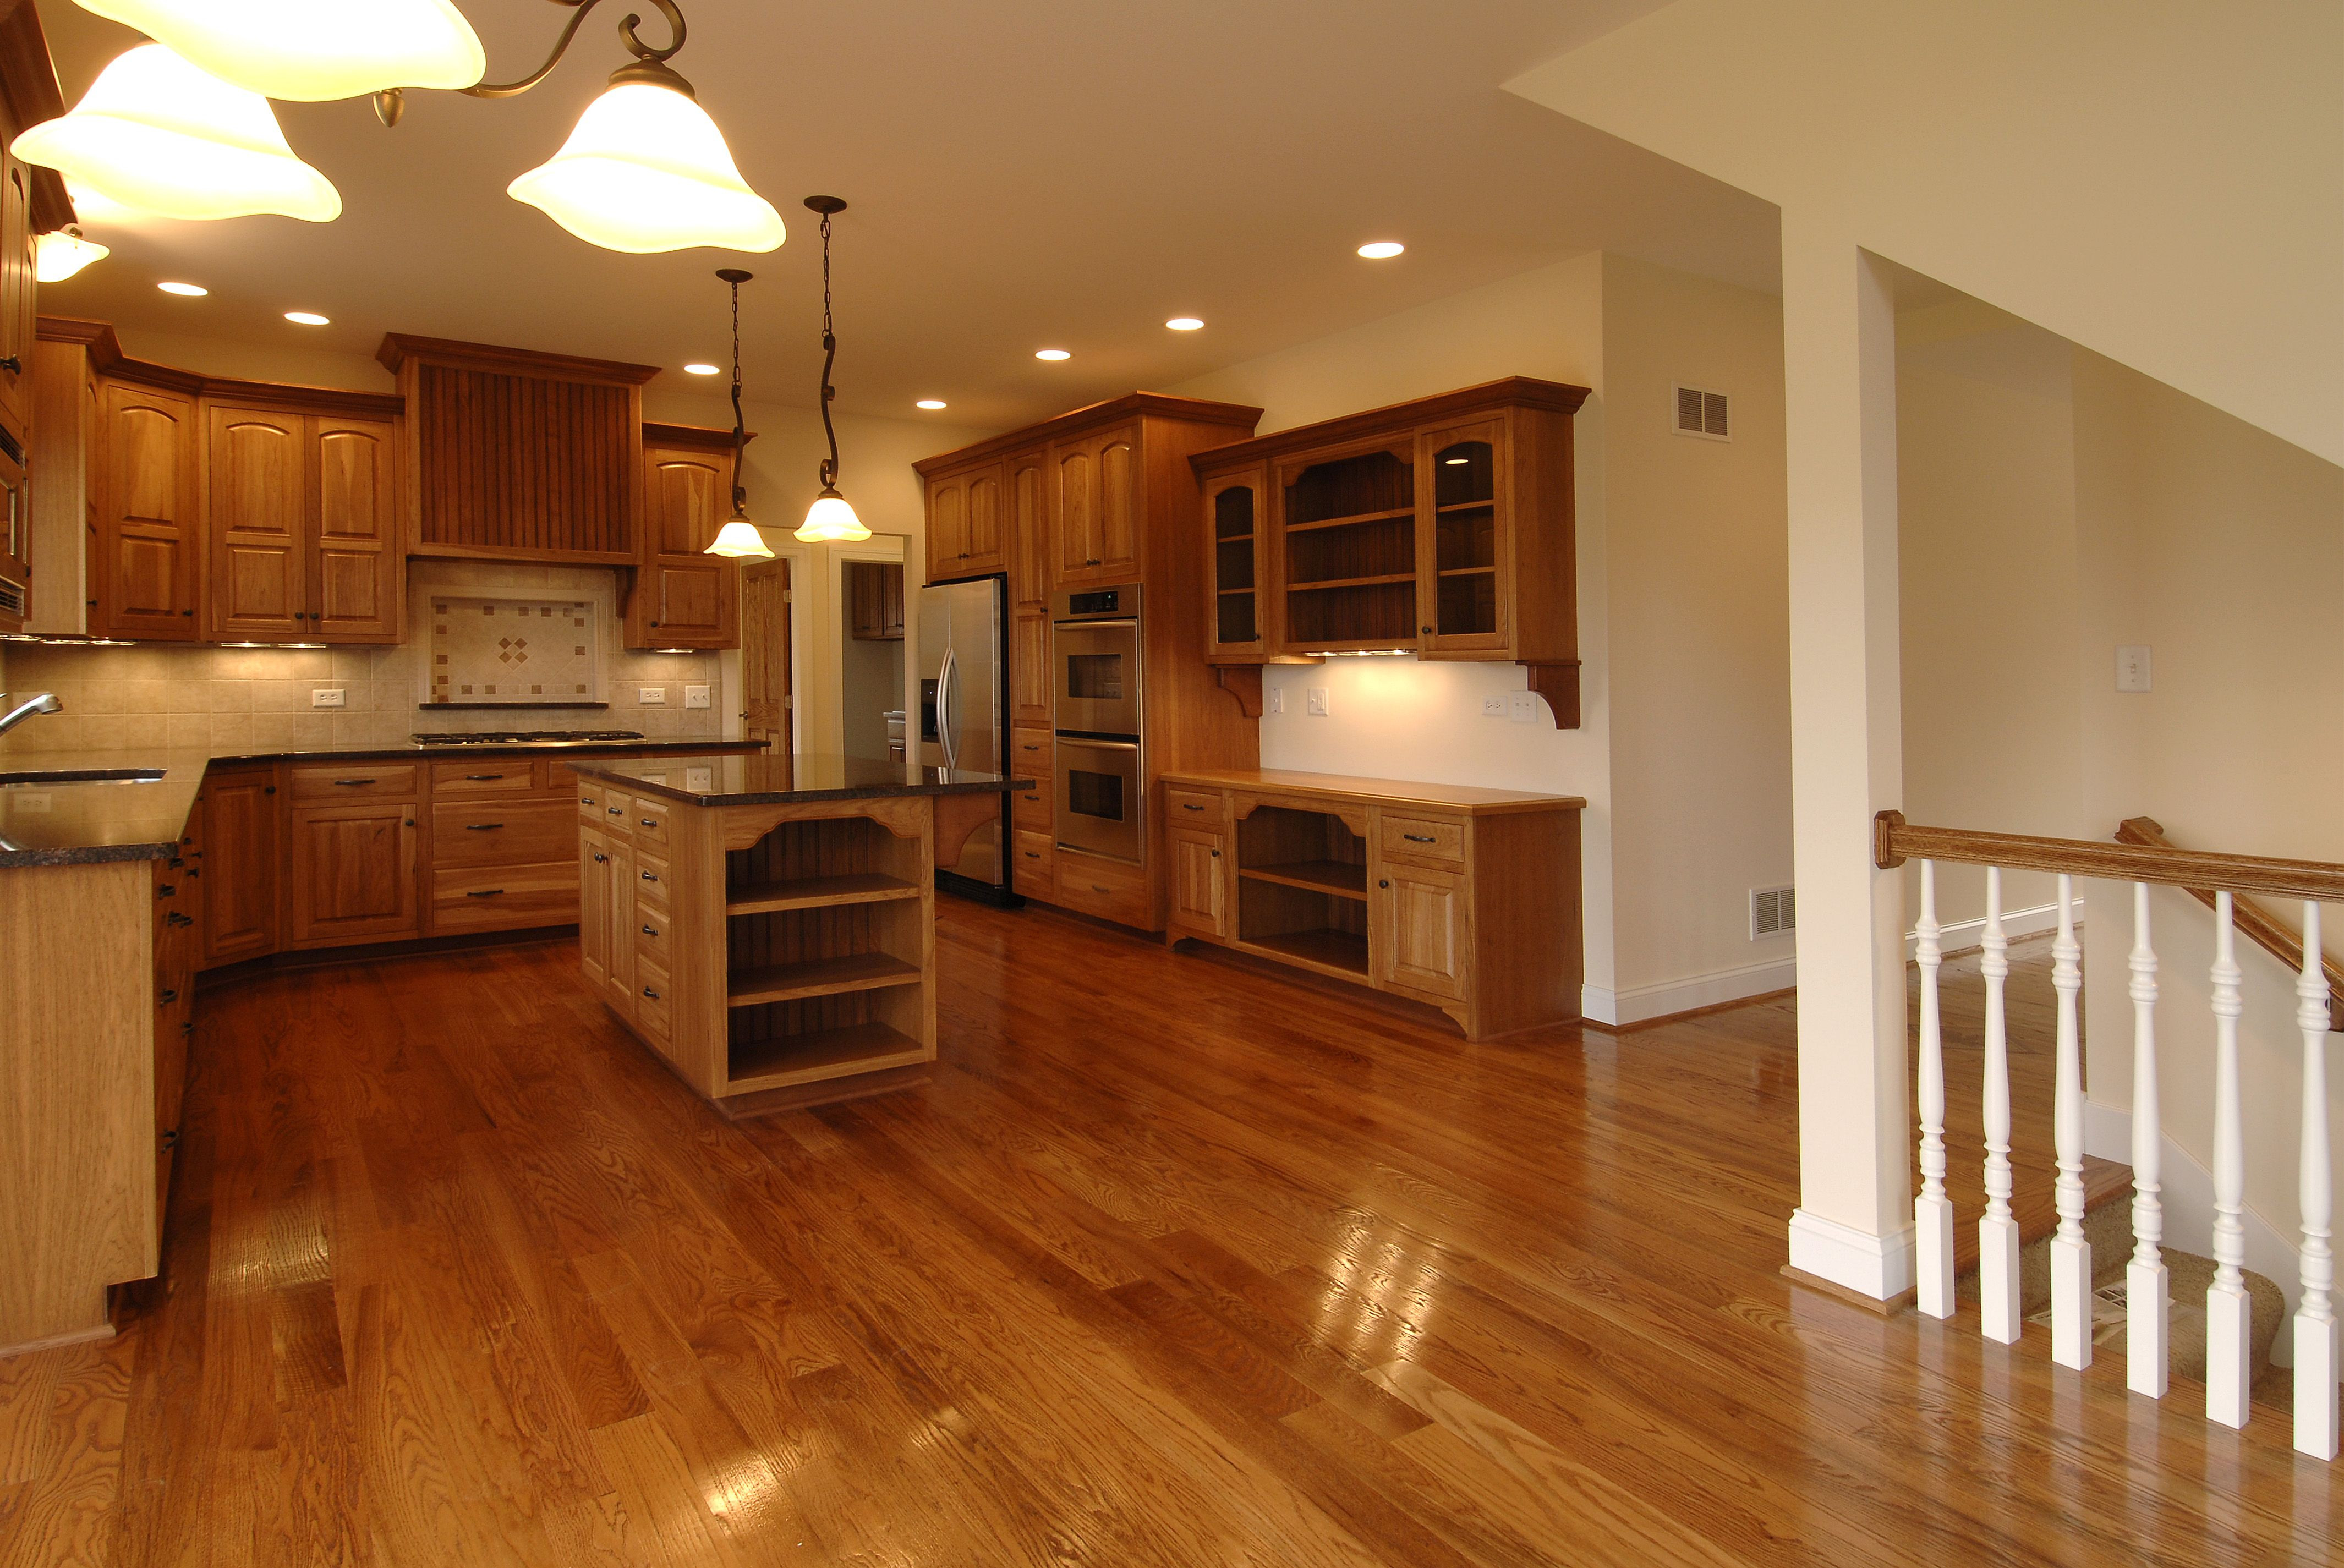 Hardwood Flooring Nyc Of attractive Pictures Of Hardwood Floors In Kitchens within Wood Regarding attractive Pictures Of Hardwood Floors In Kitchens within Wood Floors In Kitchen